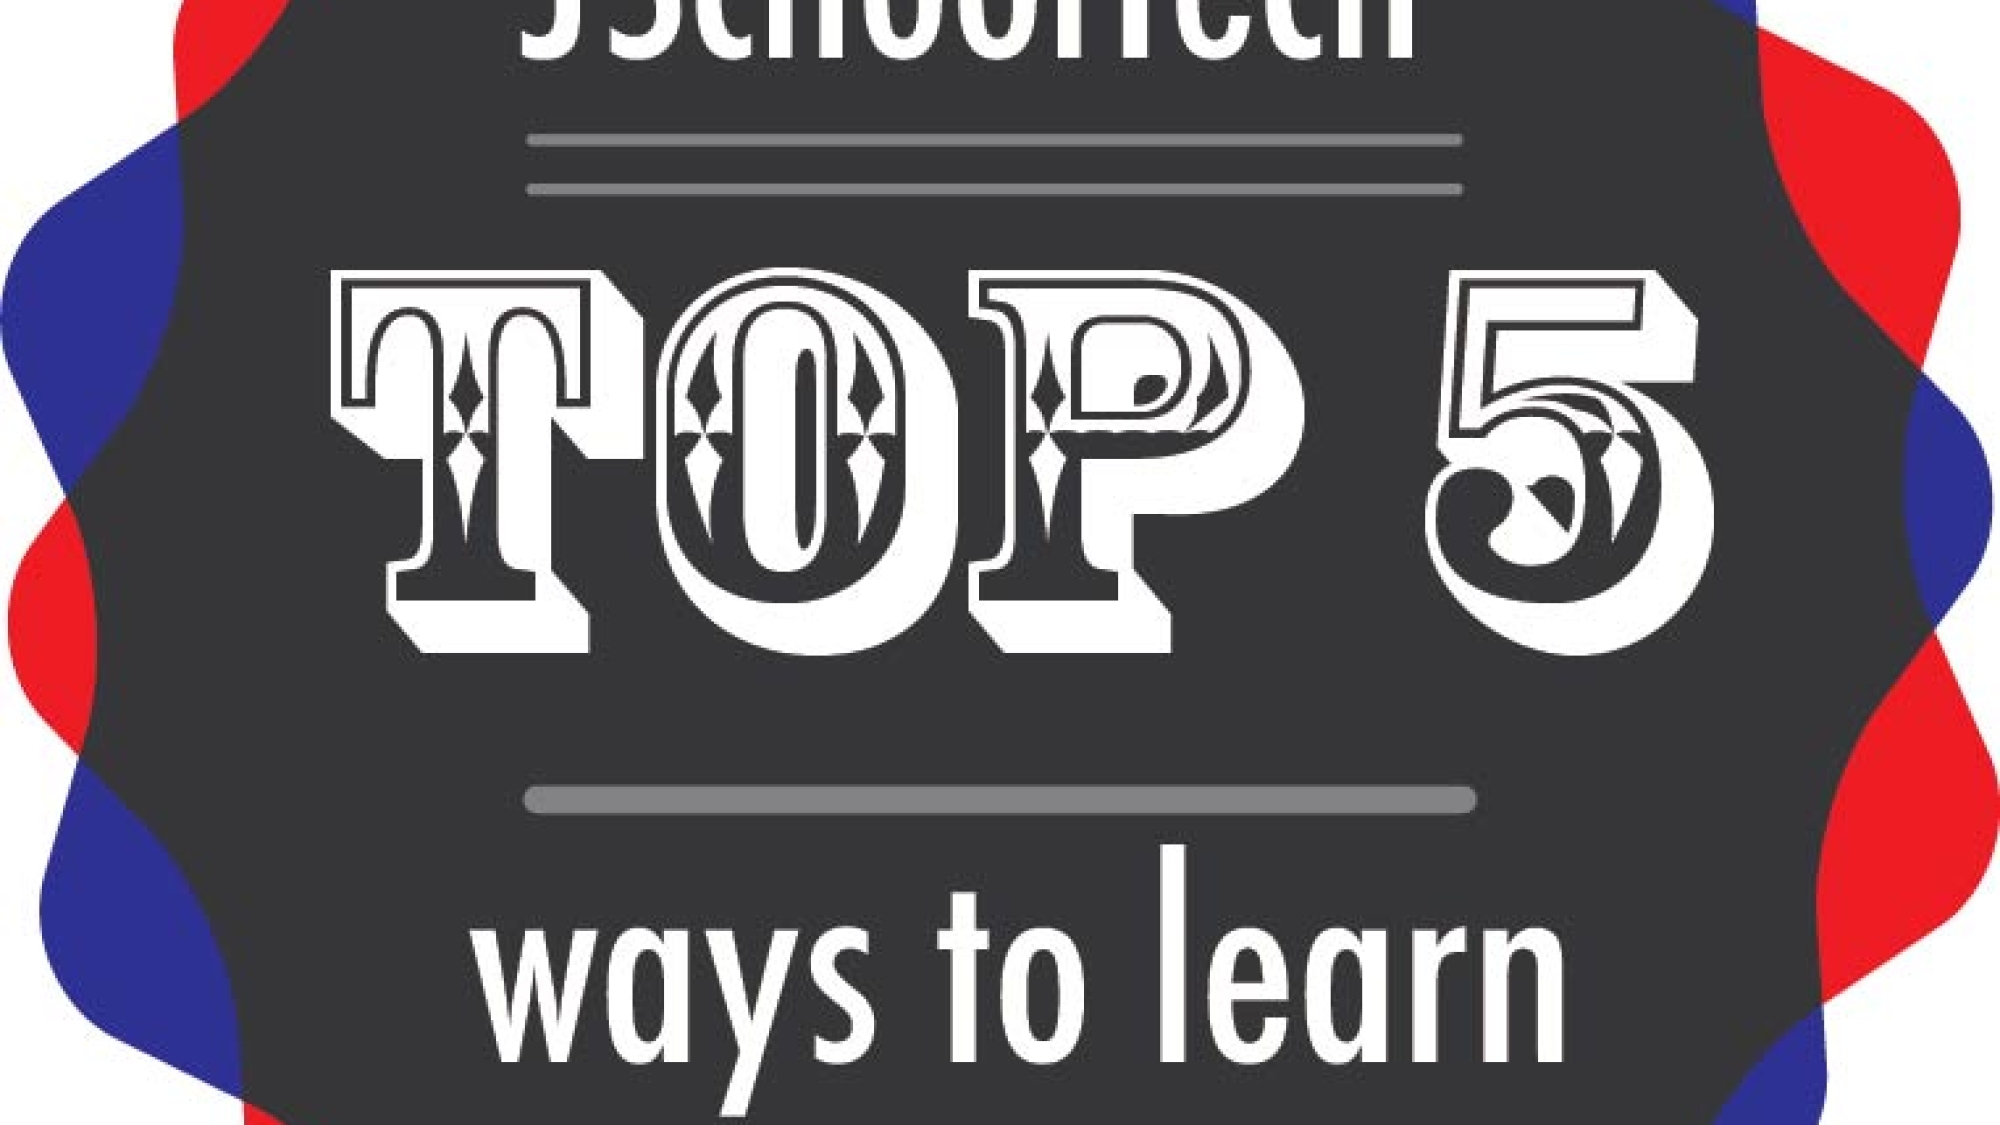 Badge in KU crimson and blue that says JSchool Tech top 5 ways to learn